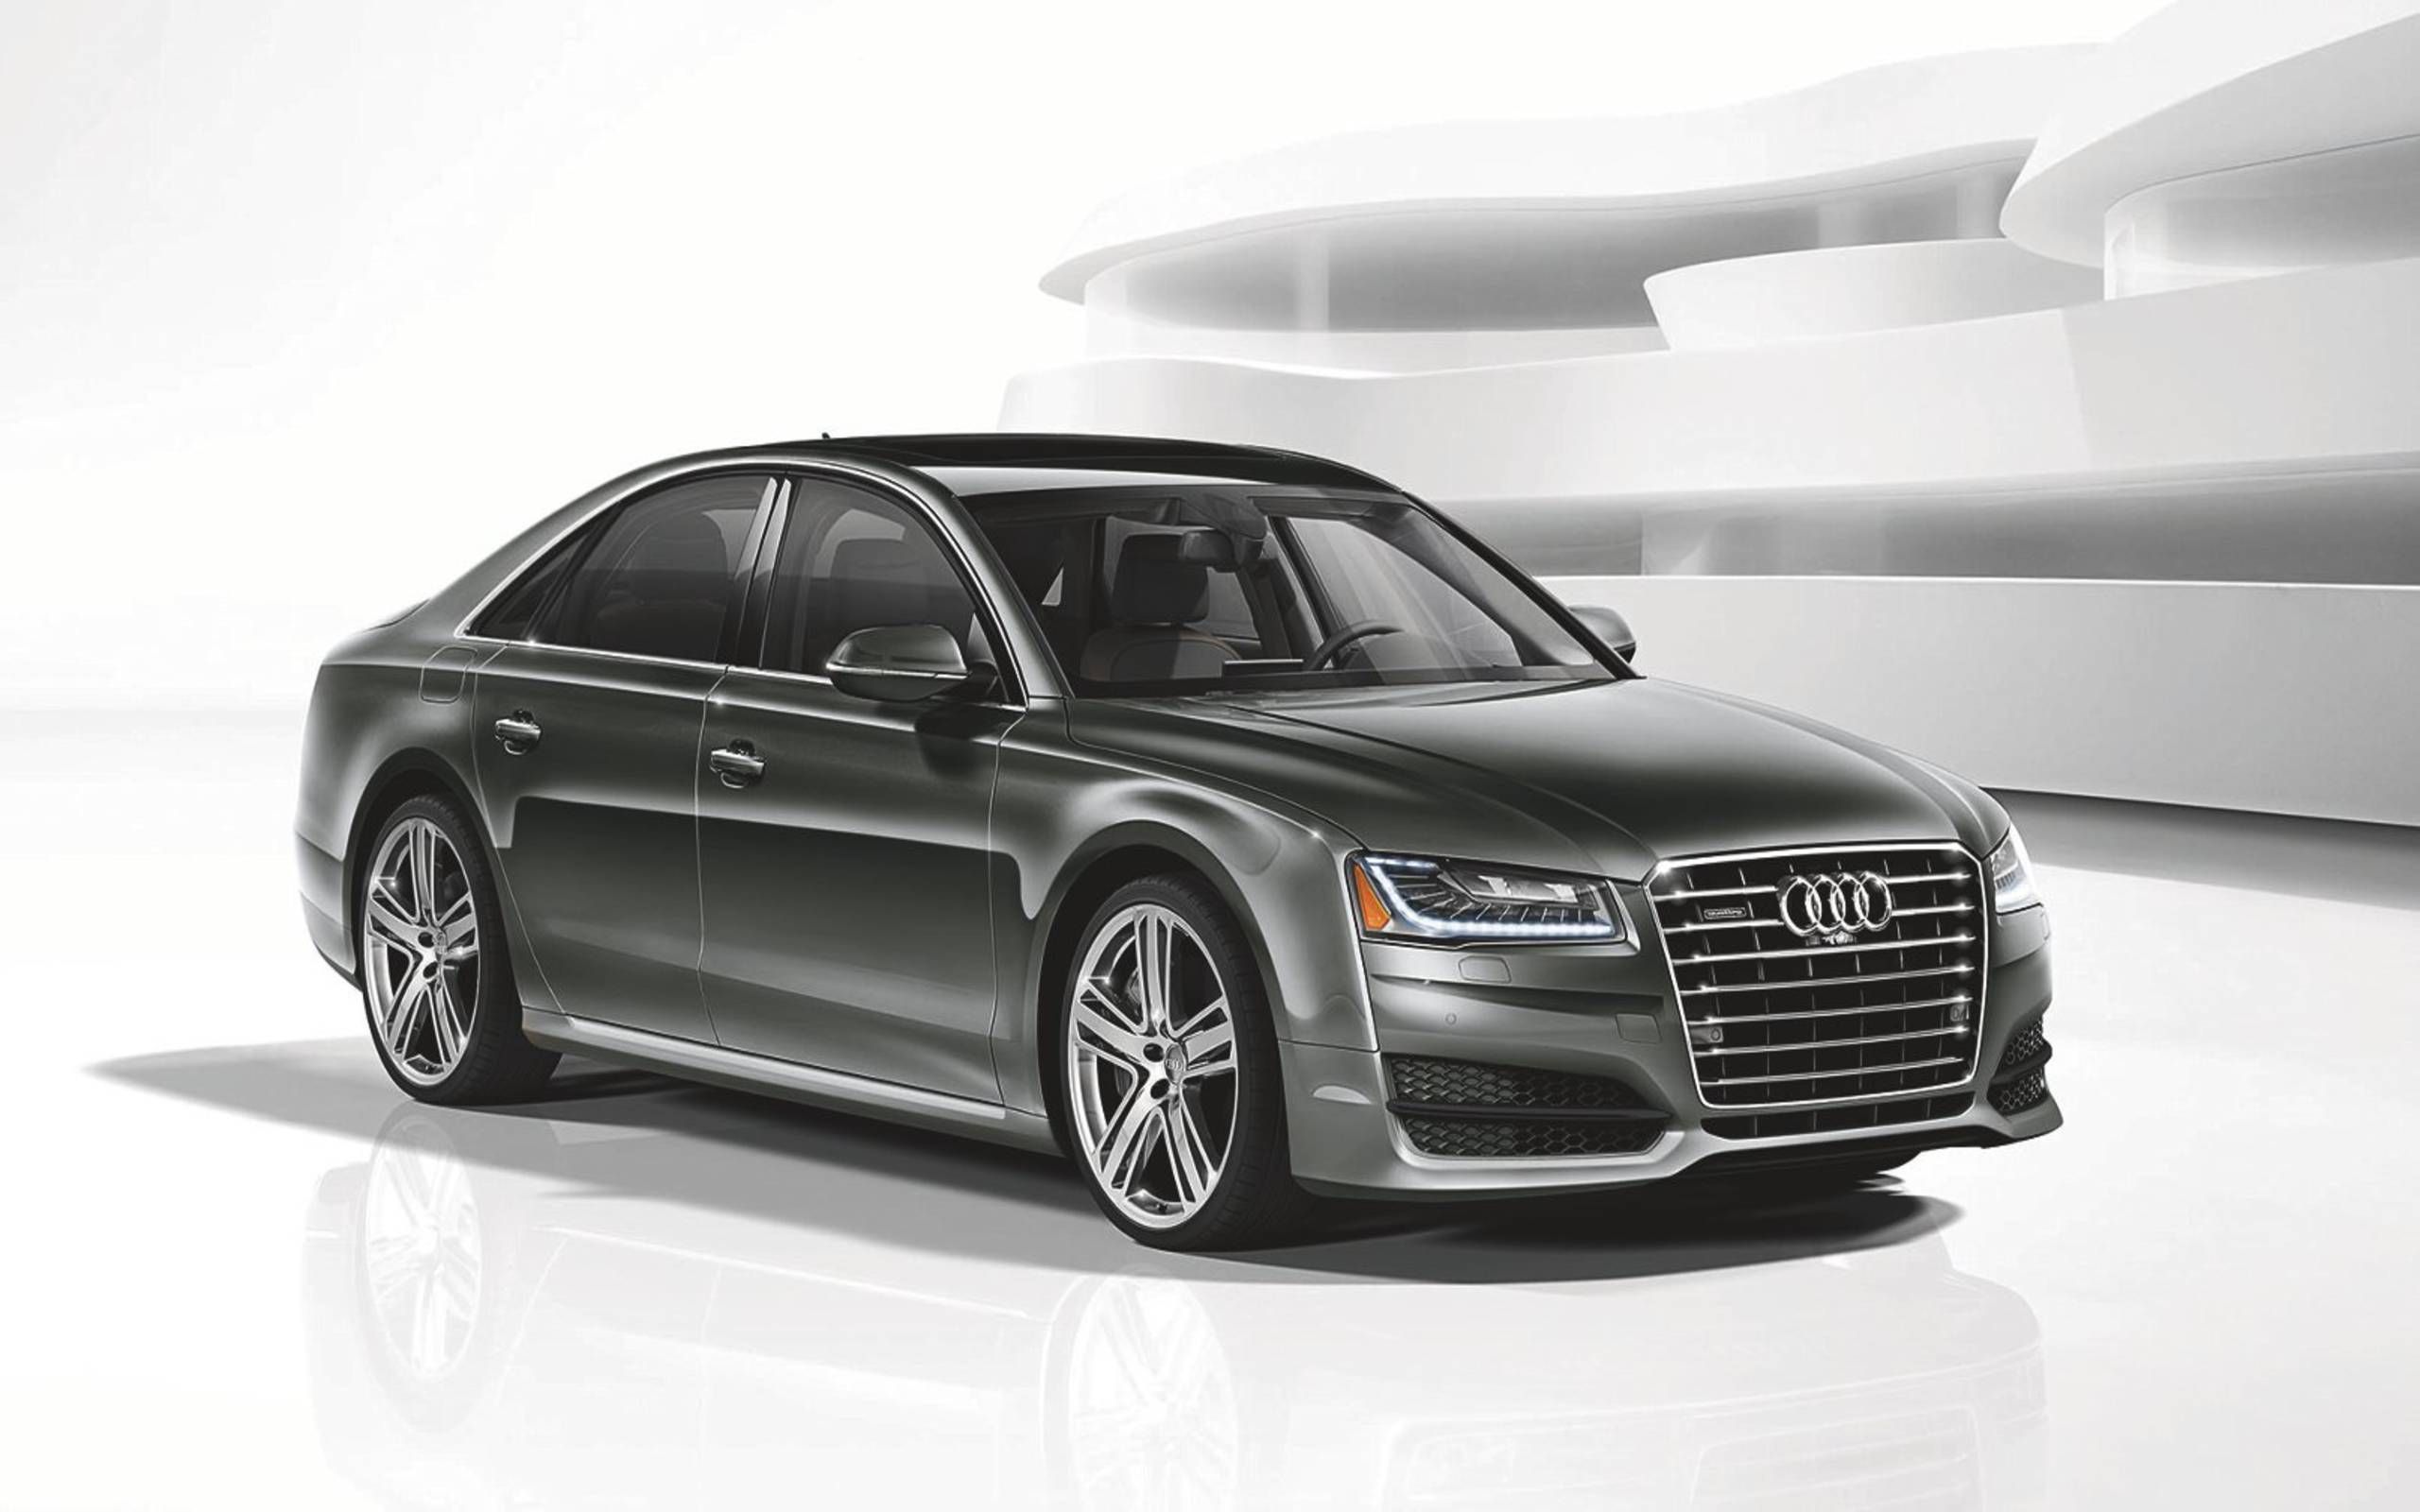 2016 Audi A8 L 4.0T Sport is the hard way to say 'budget S8'